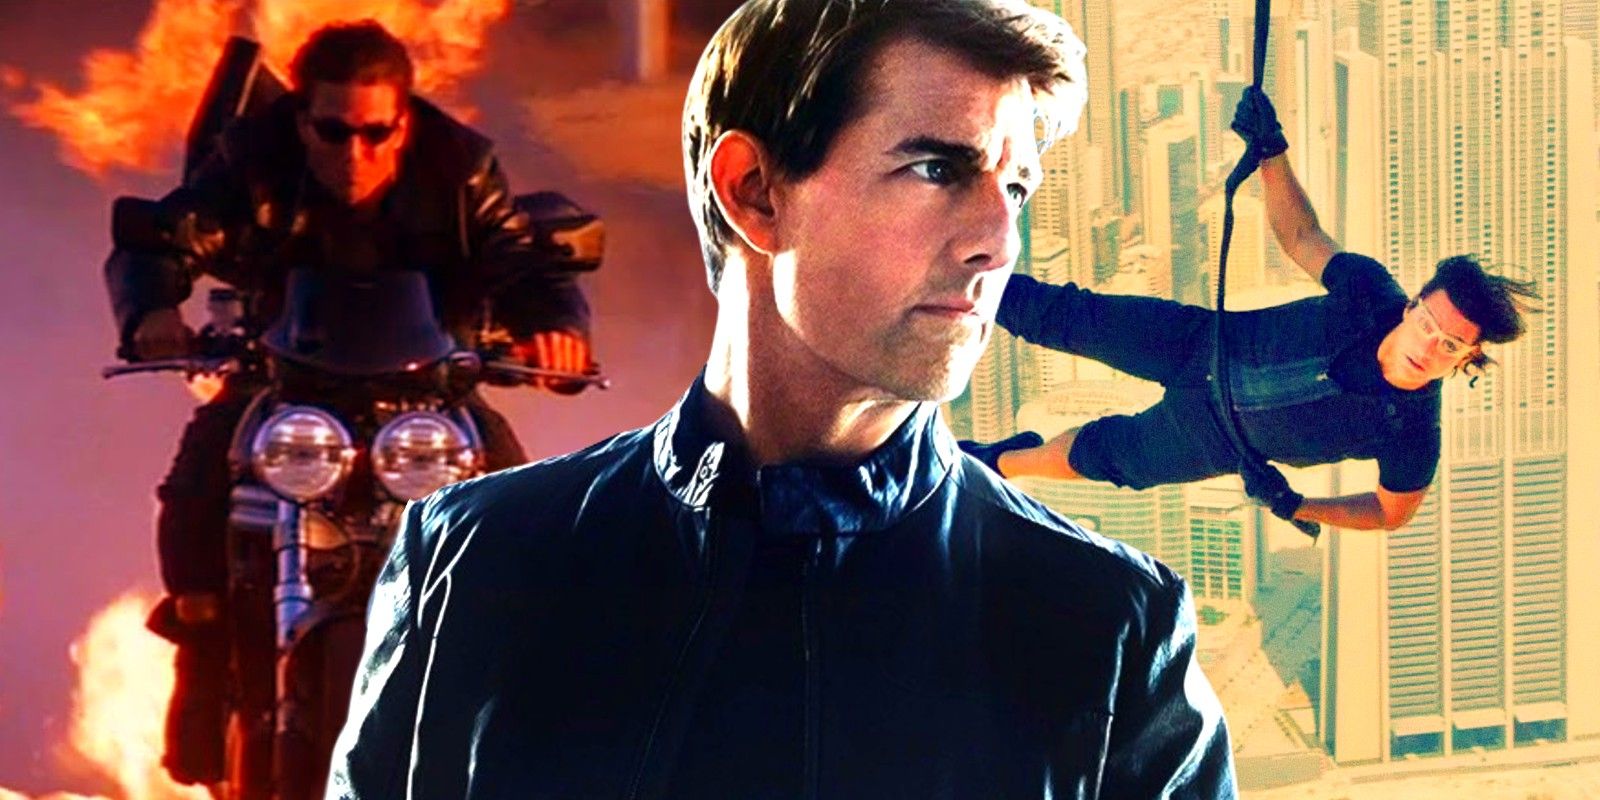 Mission Impossible Movies starring Tom Cruise